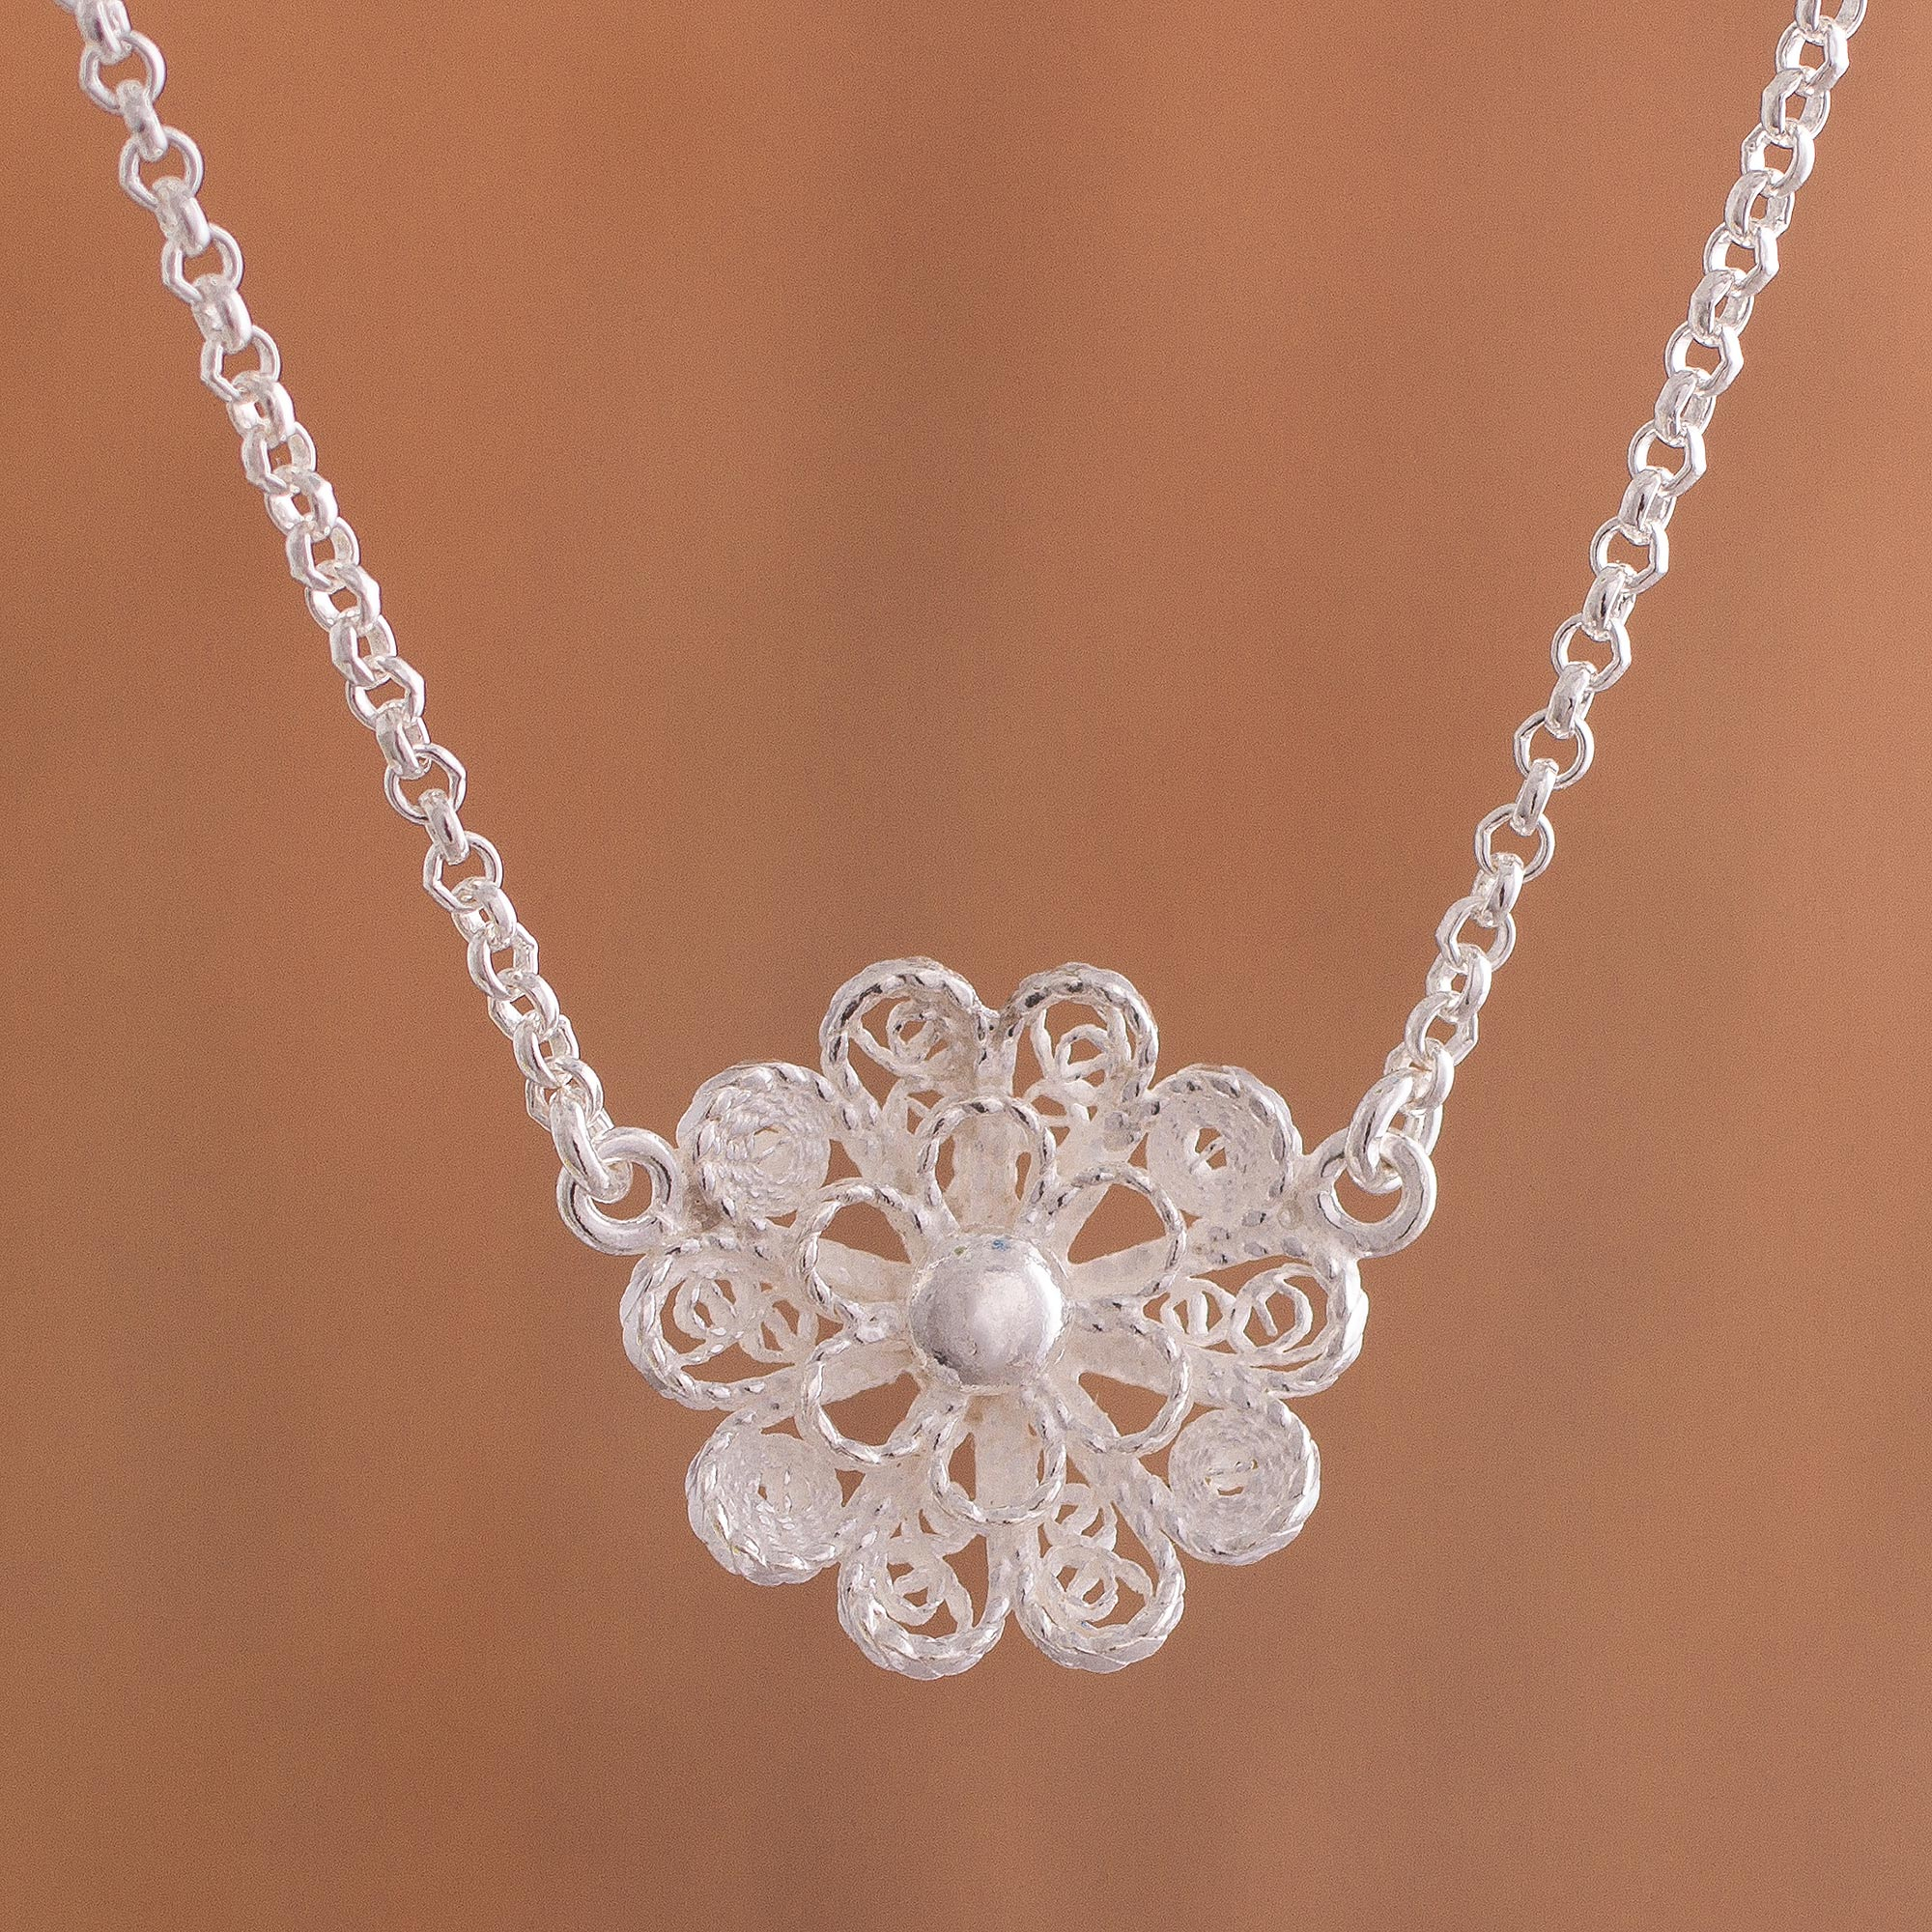 Handcrafted Sterling Silver Filigree Flower Pendant Necklace 